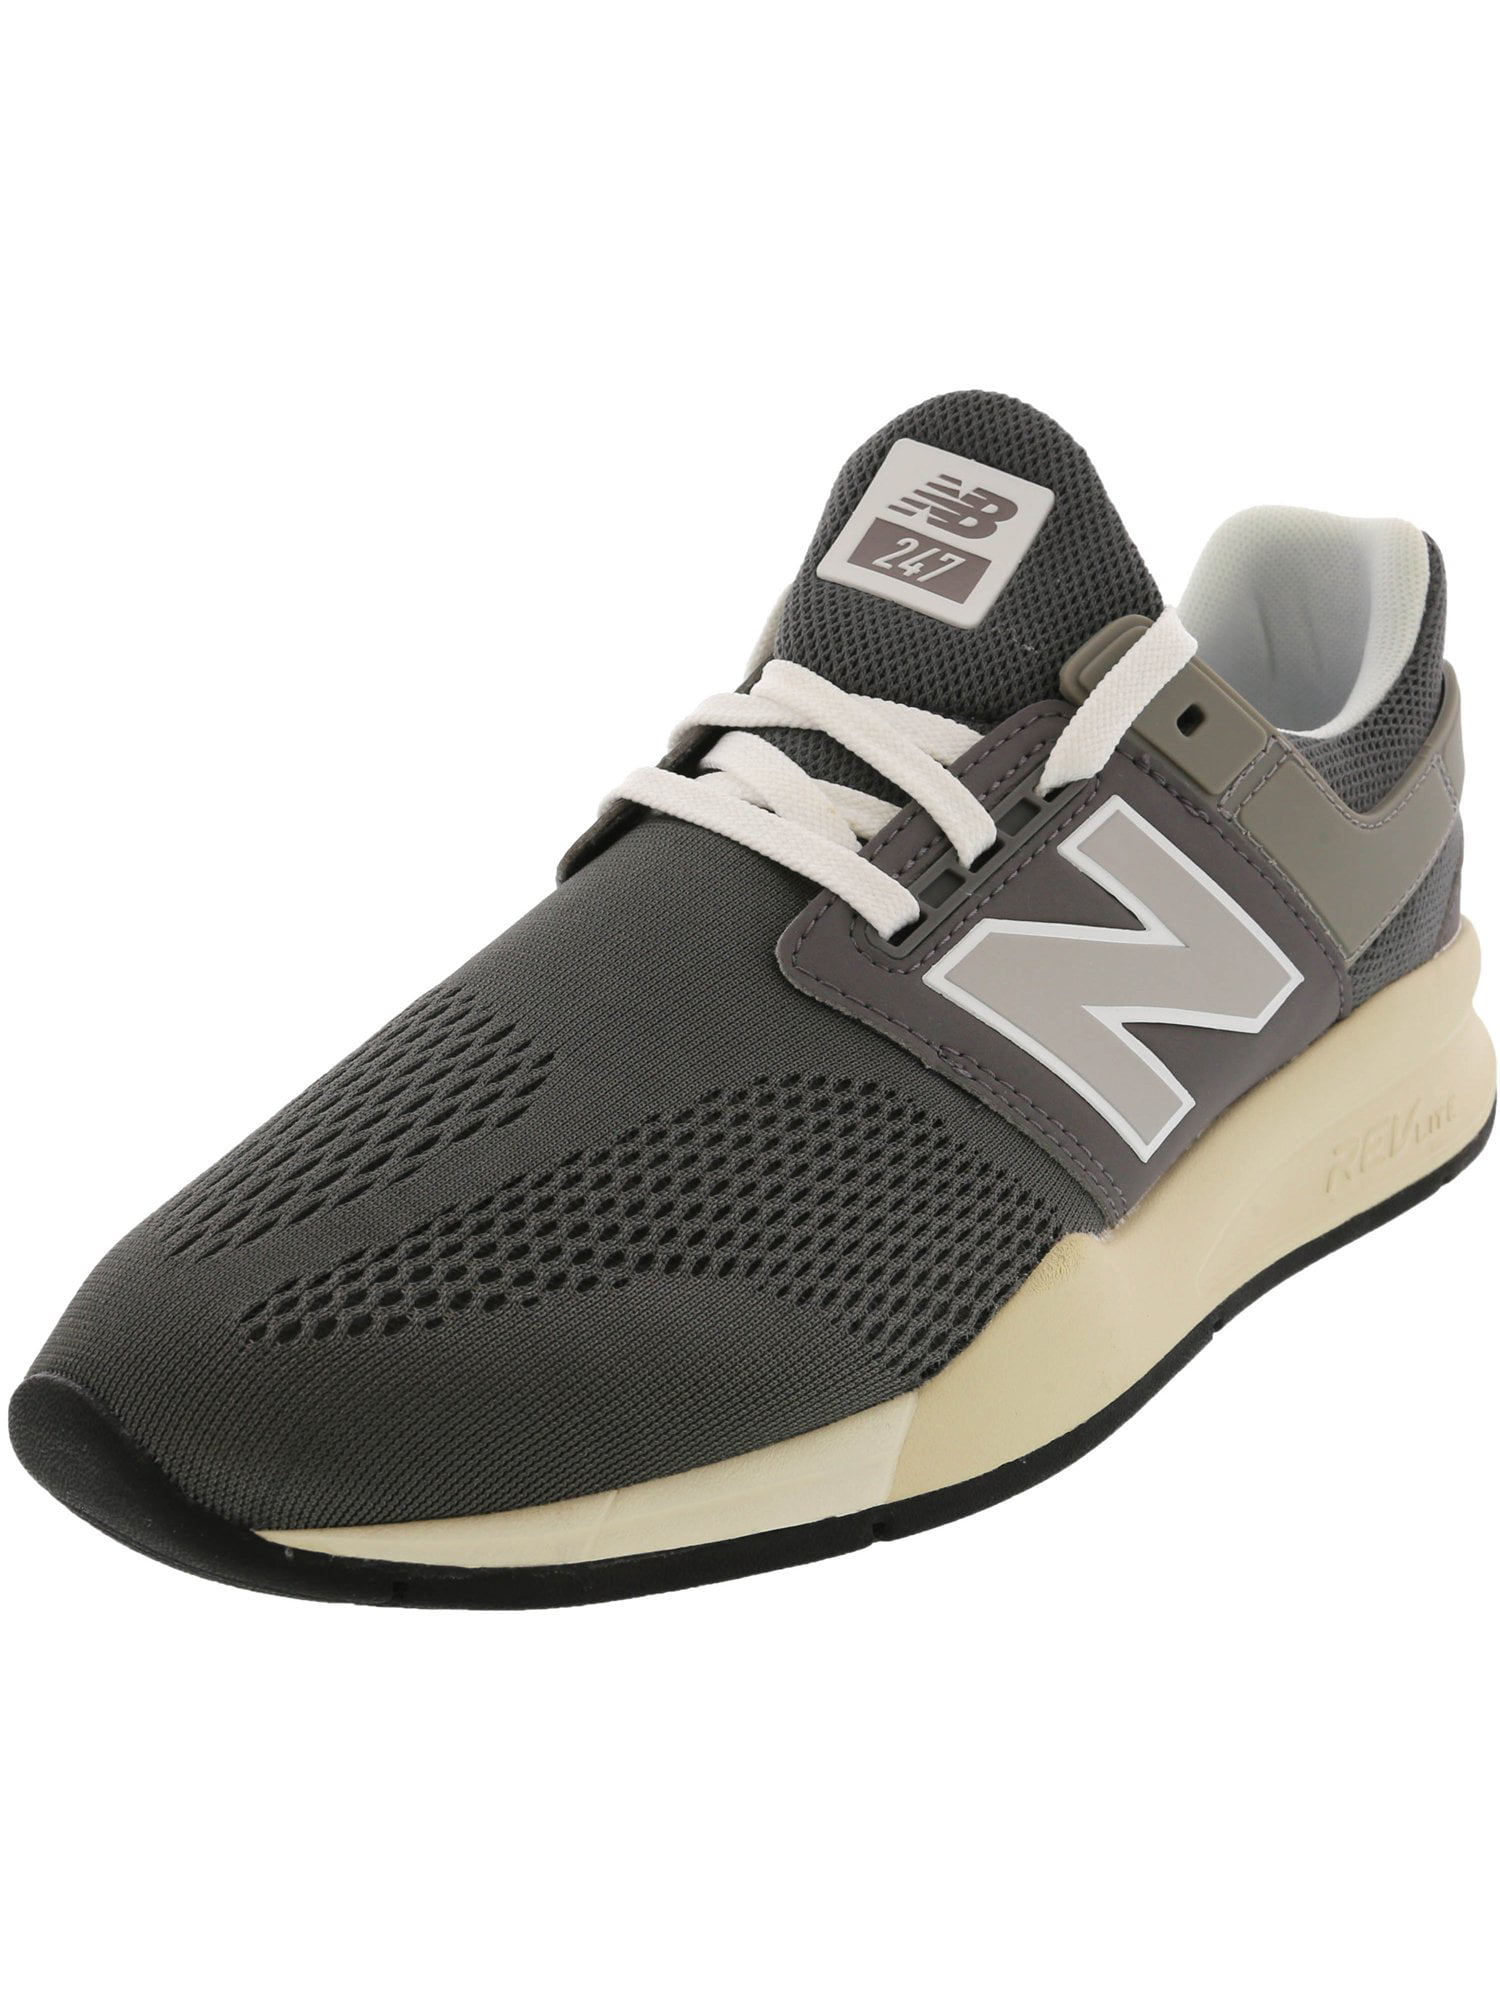 New Balance Men's Ms247 Mm Ankle-High 